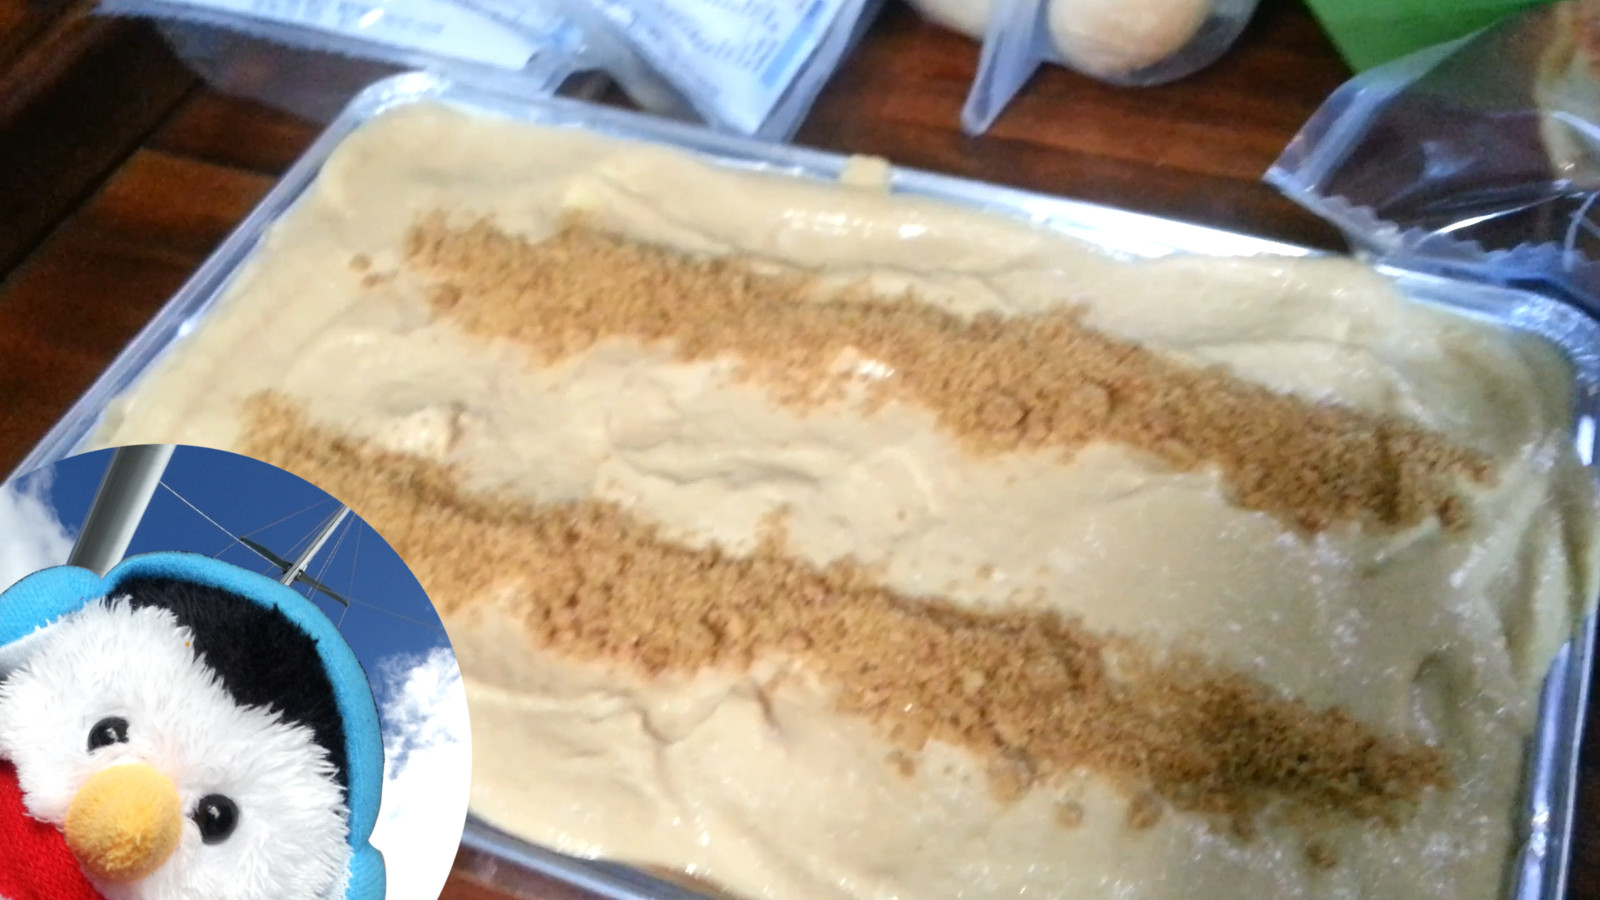 Watch me making the cheats Banoffee pie and add comments etc.